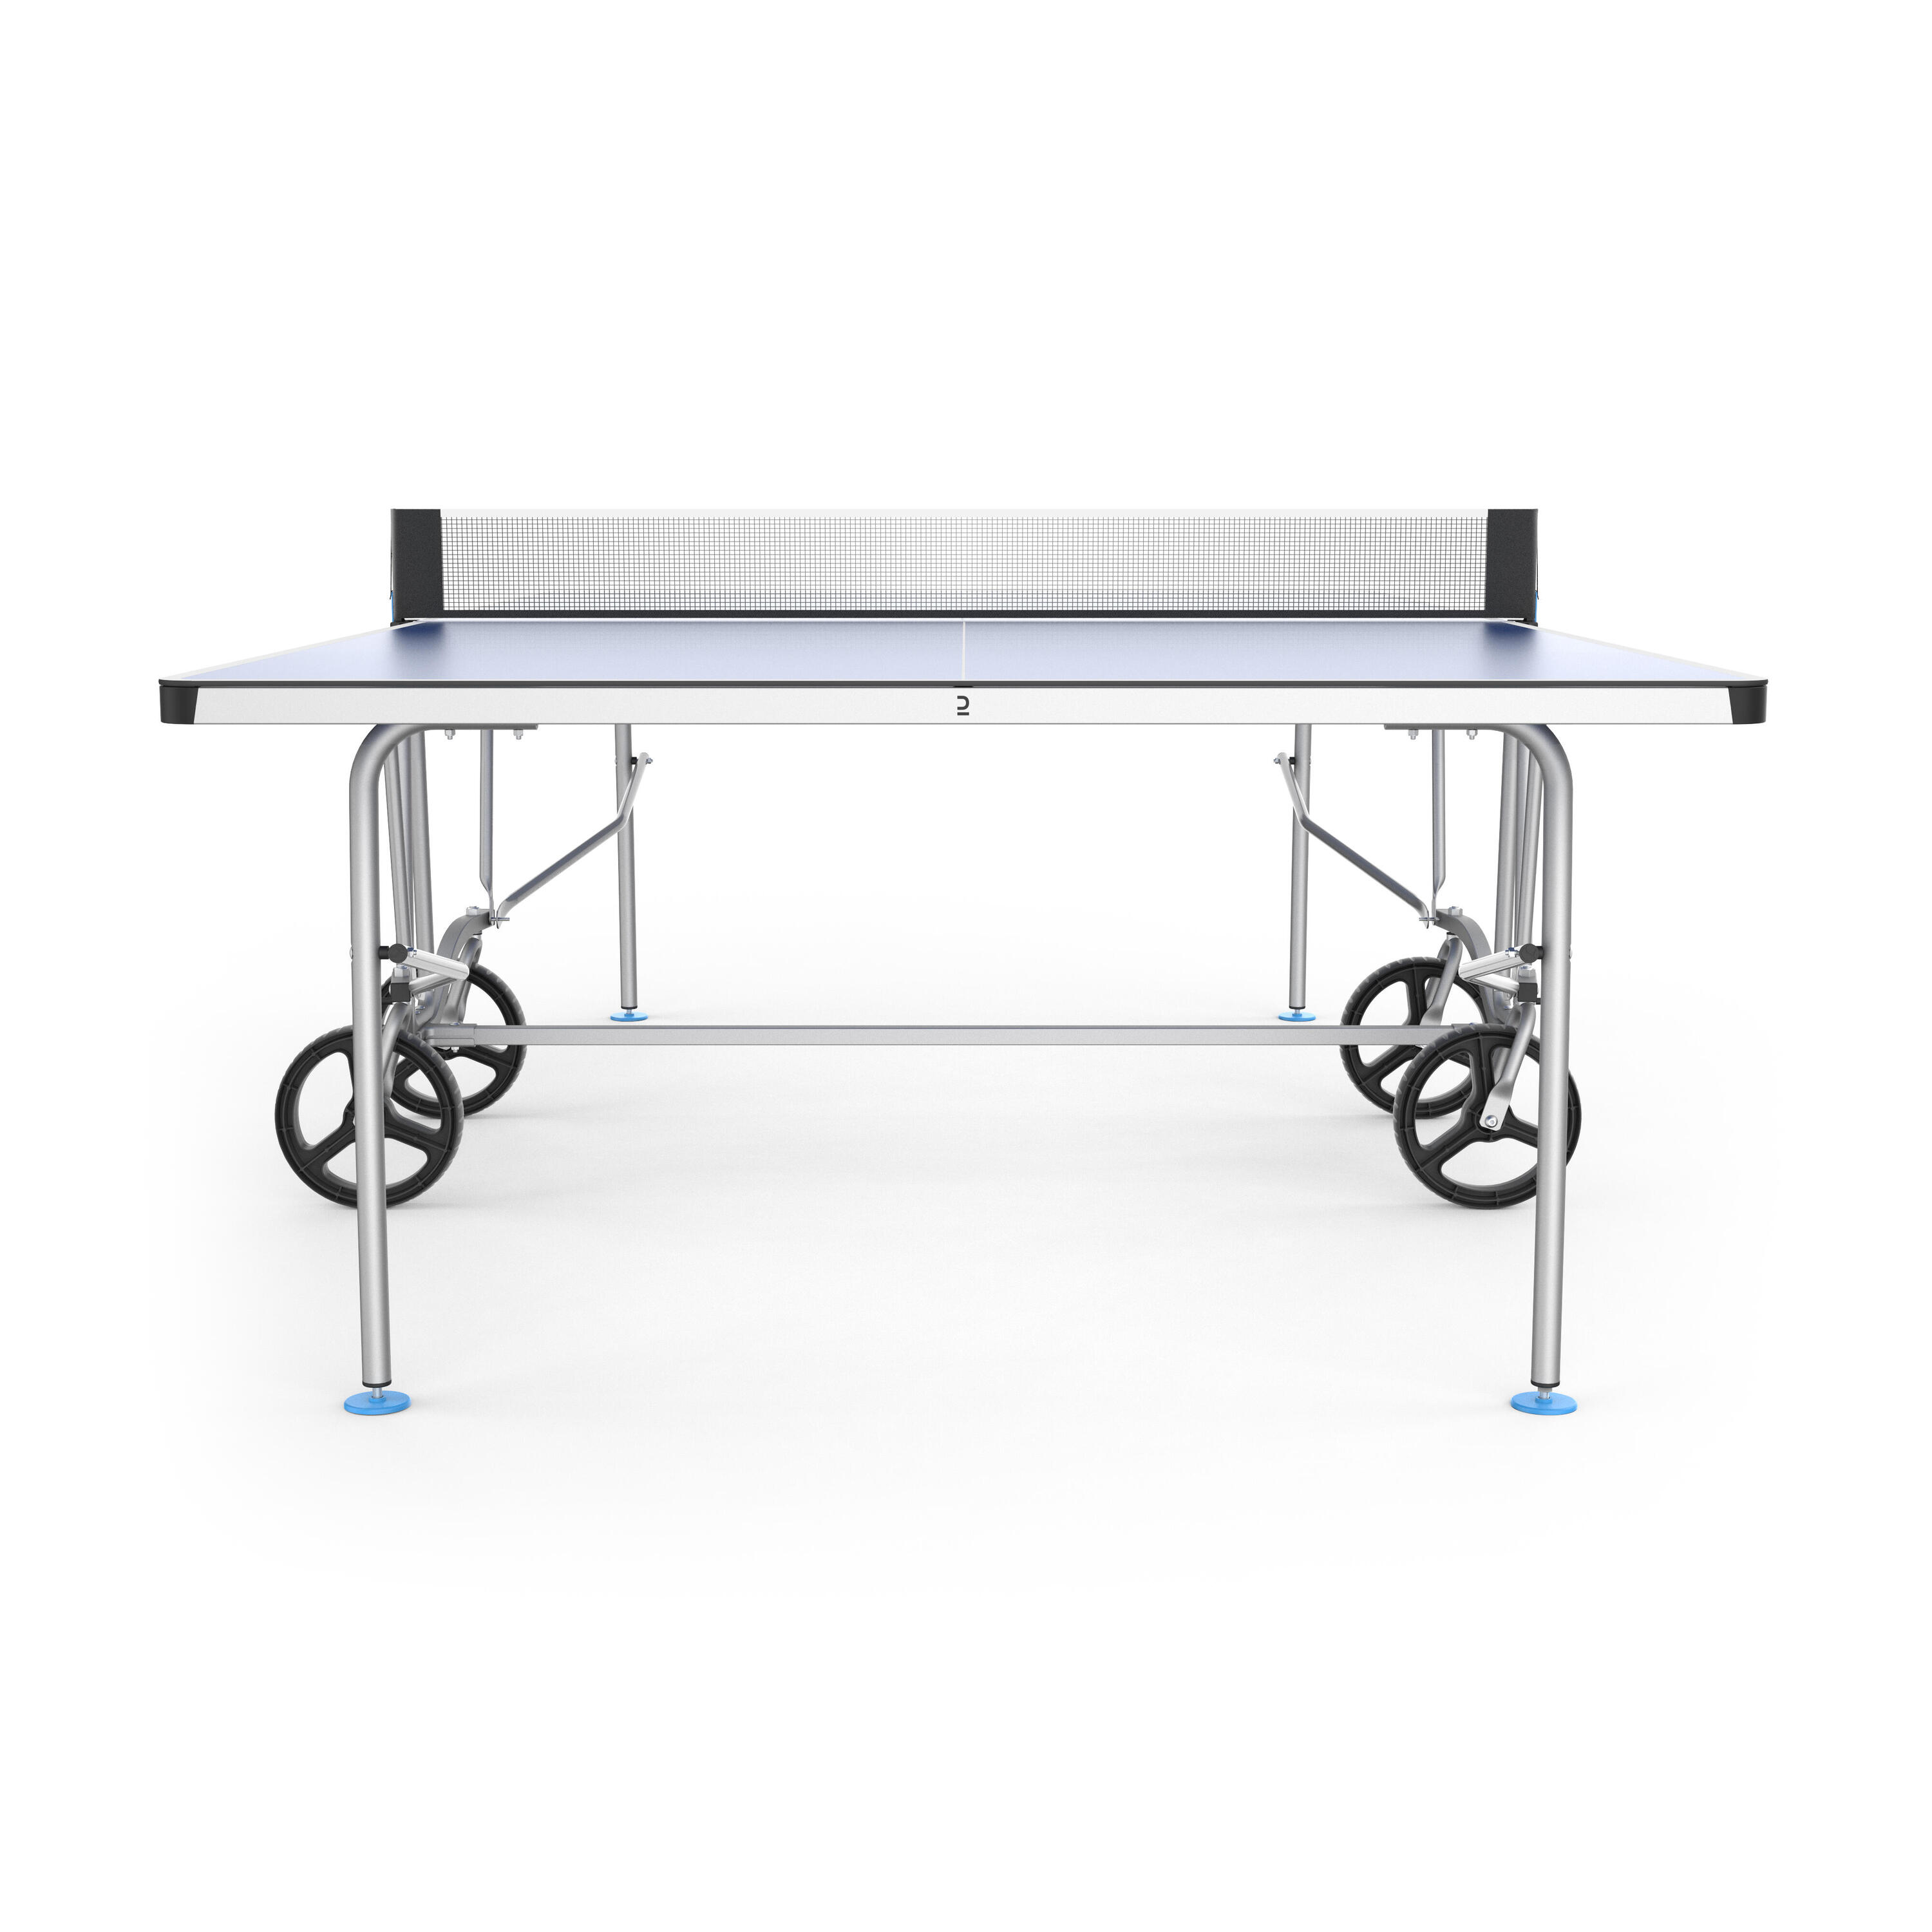 Outdoor Table Tennis Table PPT 500.2 - Blue 11/14